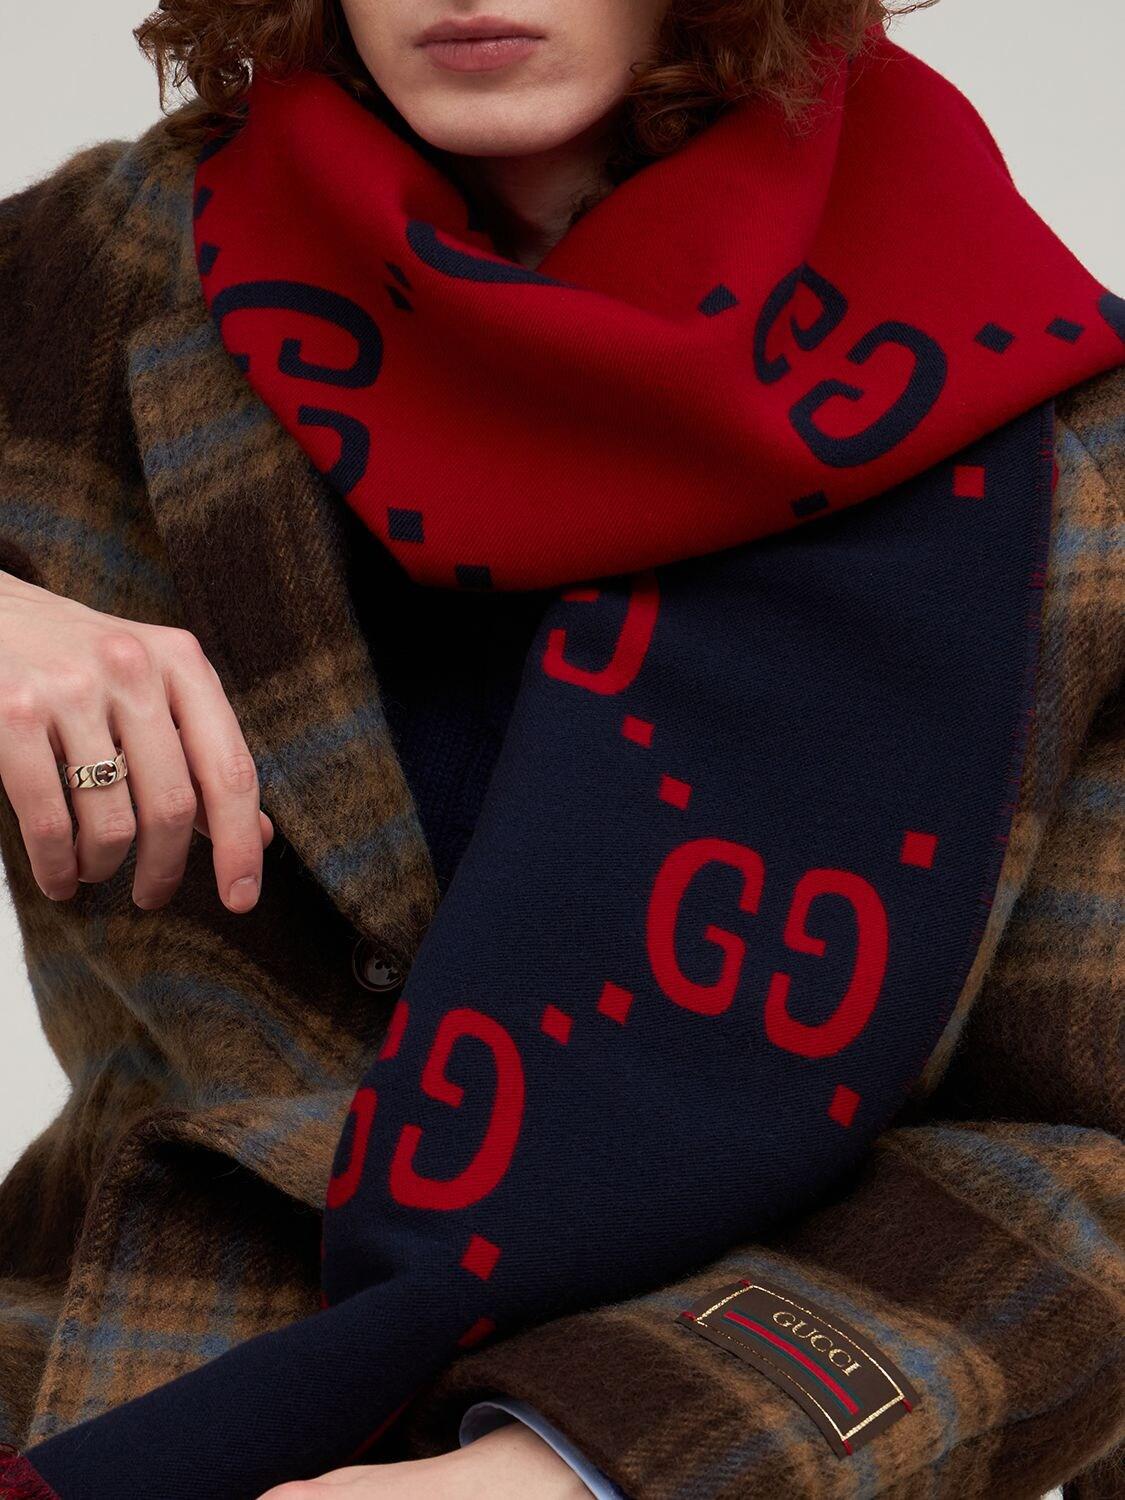 Gucci Gg Jacquard Wool & Silk Scarf in Blue for Men